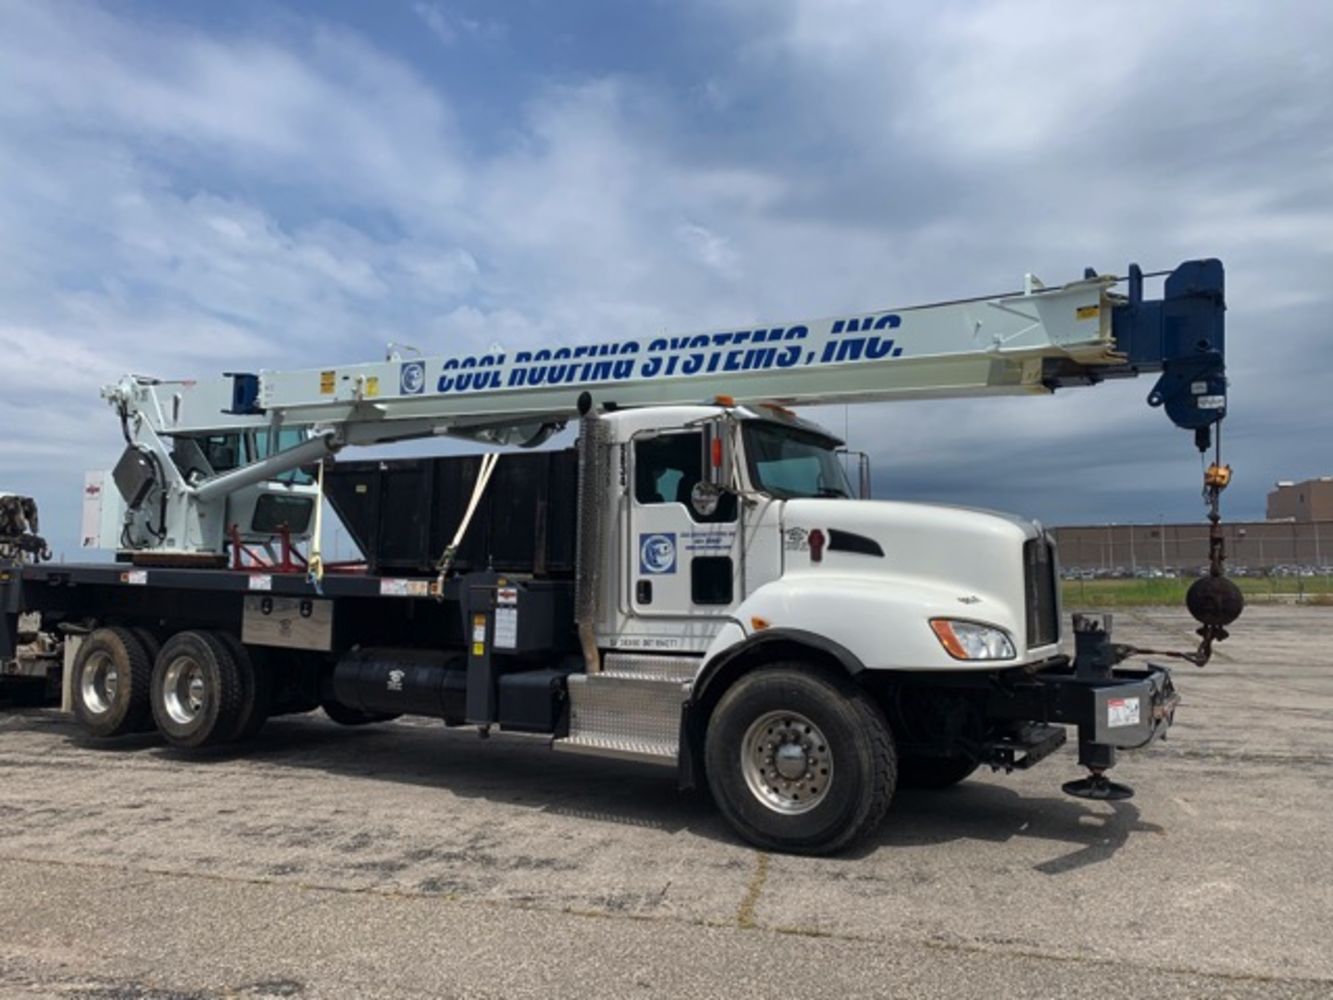 Bankruptcy Auction - Manitex 30112S Boom Truck Crane, mounted on 2015 Kenworth T470 Tractor